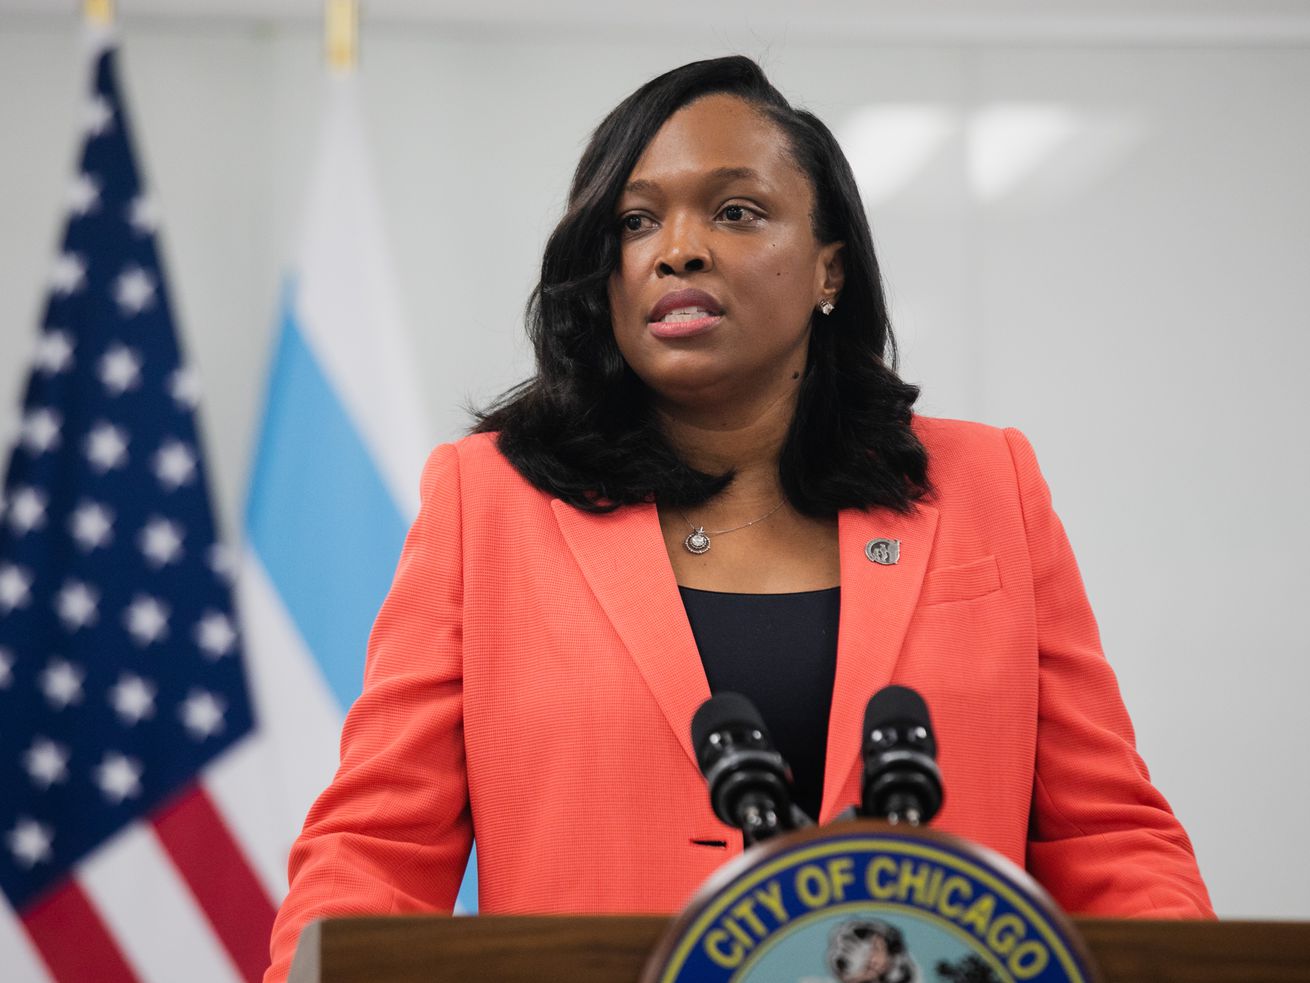 Chicago Public Schools CEO Dr. Janice Jackson speaks during a press conference at the Chicago Public Schools Headquarters last July.